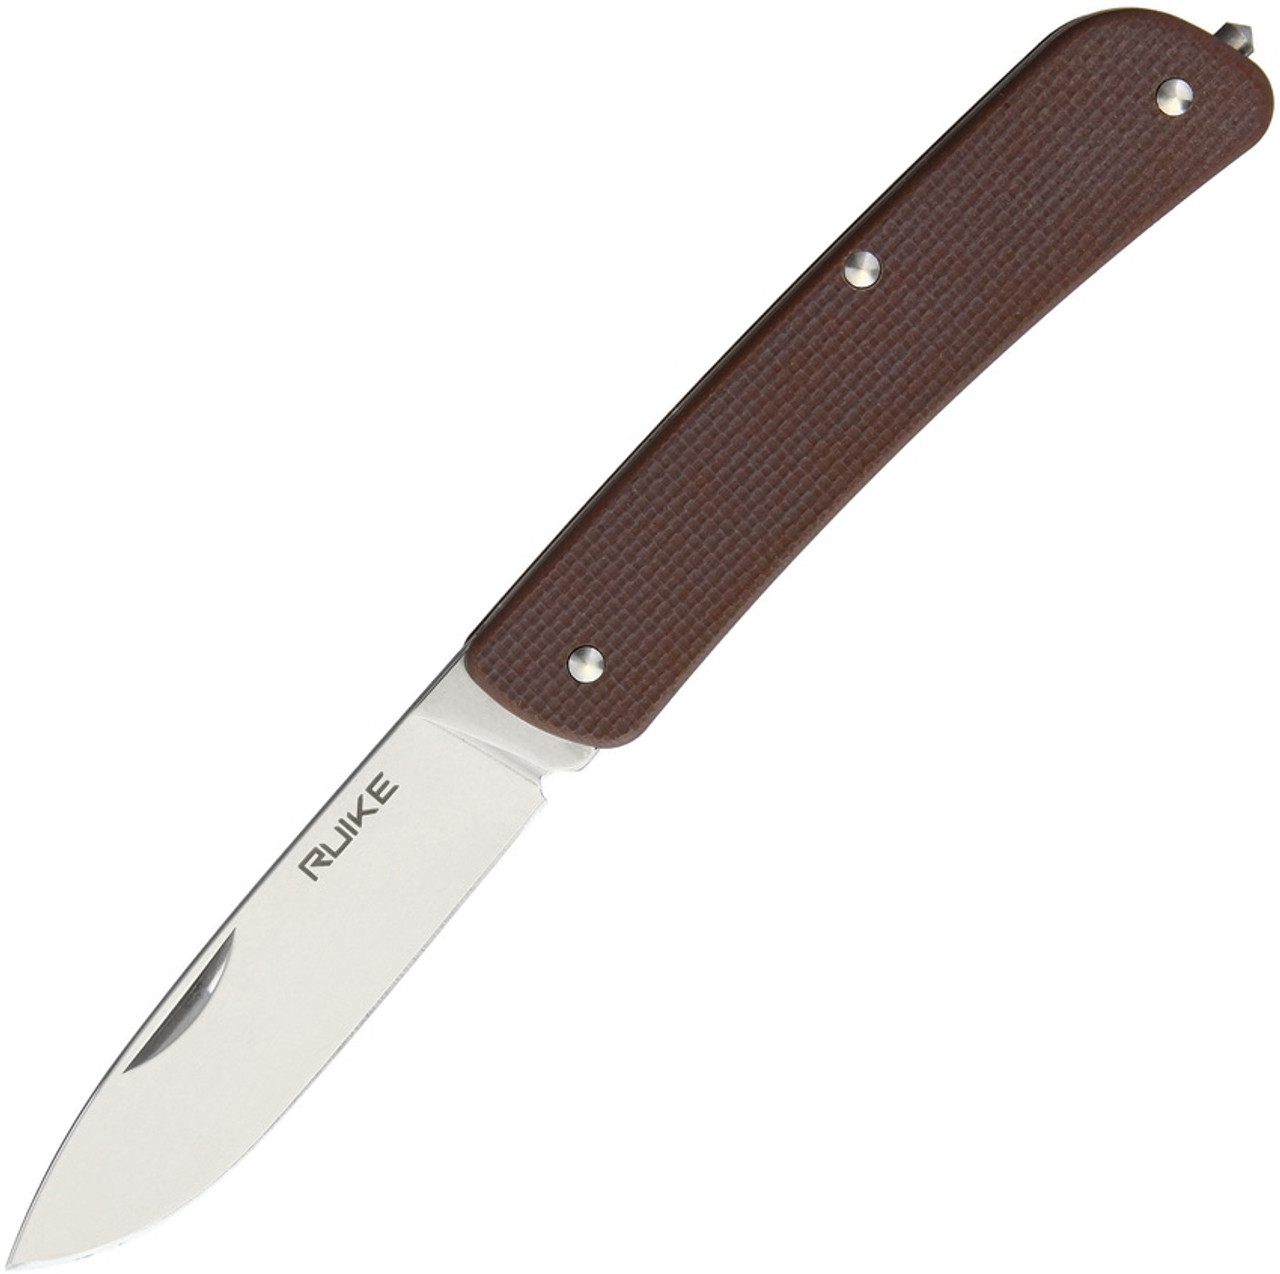 Ruike L11-N Criterion Collection, 3.35" 12C27 Plain Blade, Brown G-10 Handle